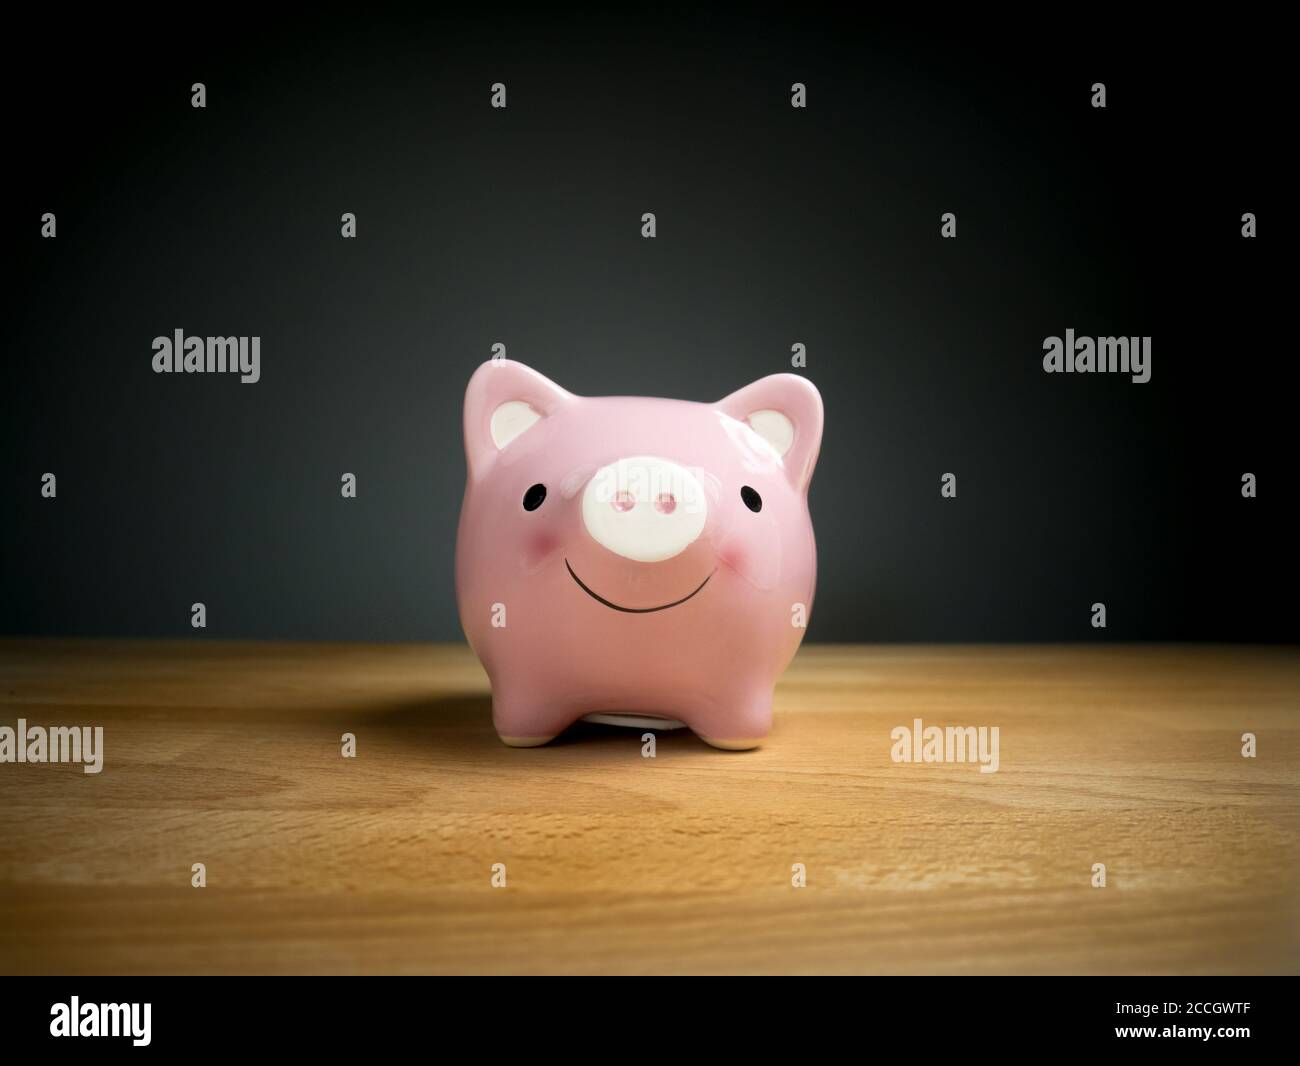 Piggy Bank, Savings, Currency concept : Pink piggy bank with smile face on wooden table with black background Stock Photo